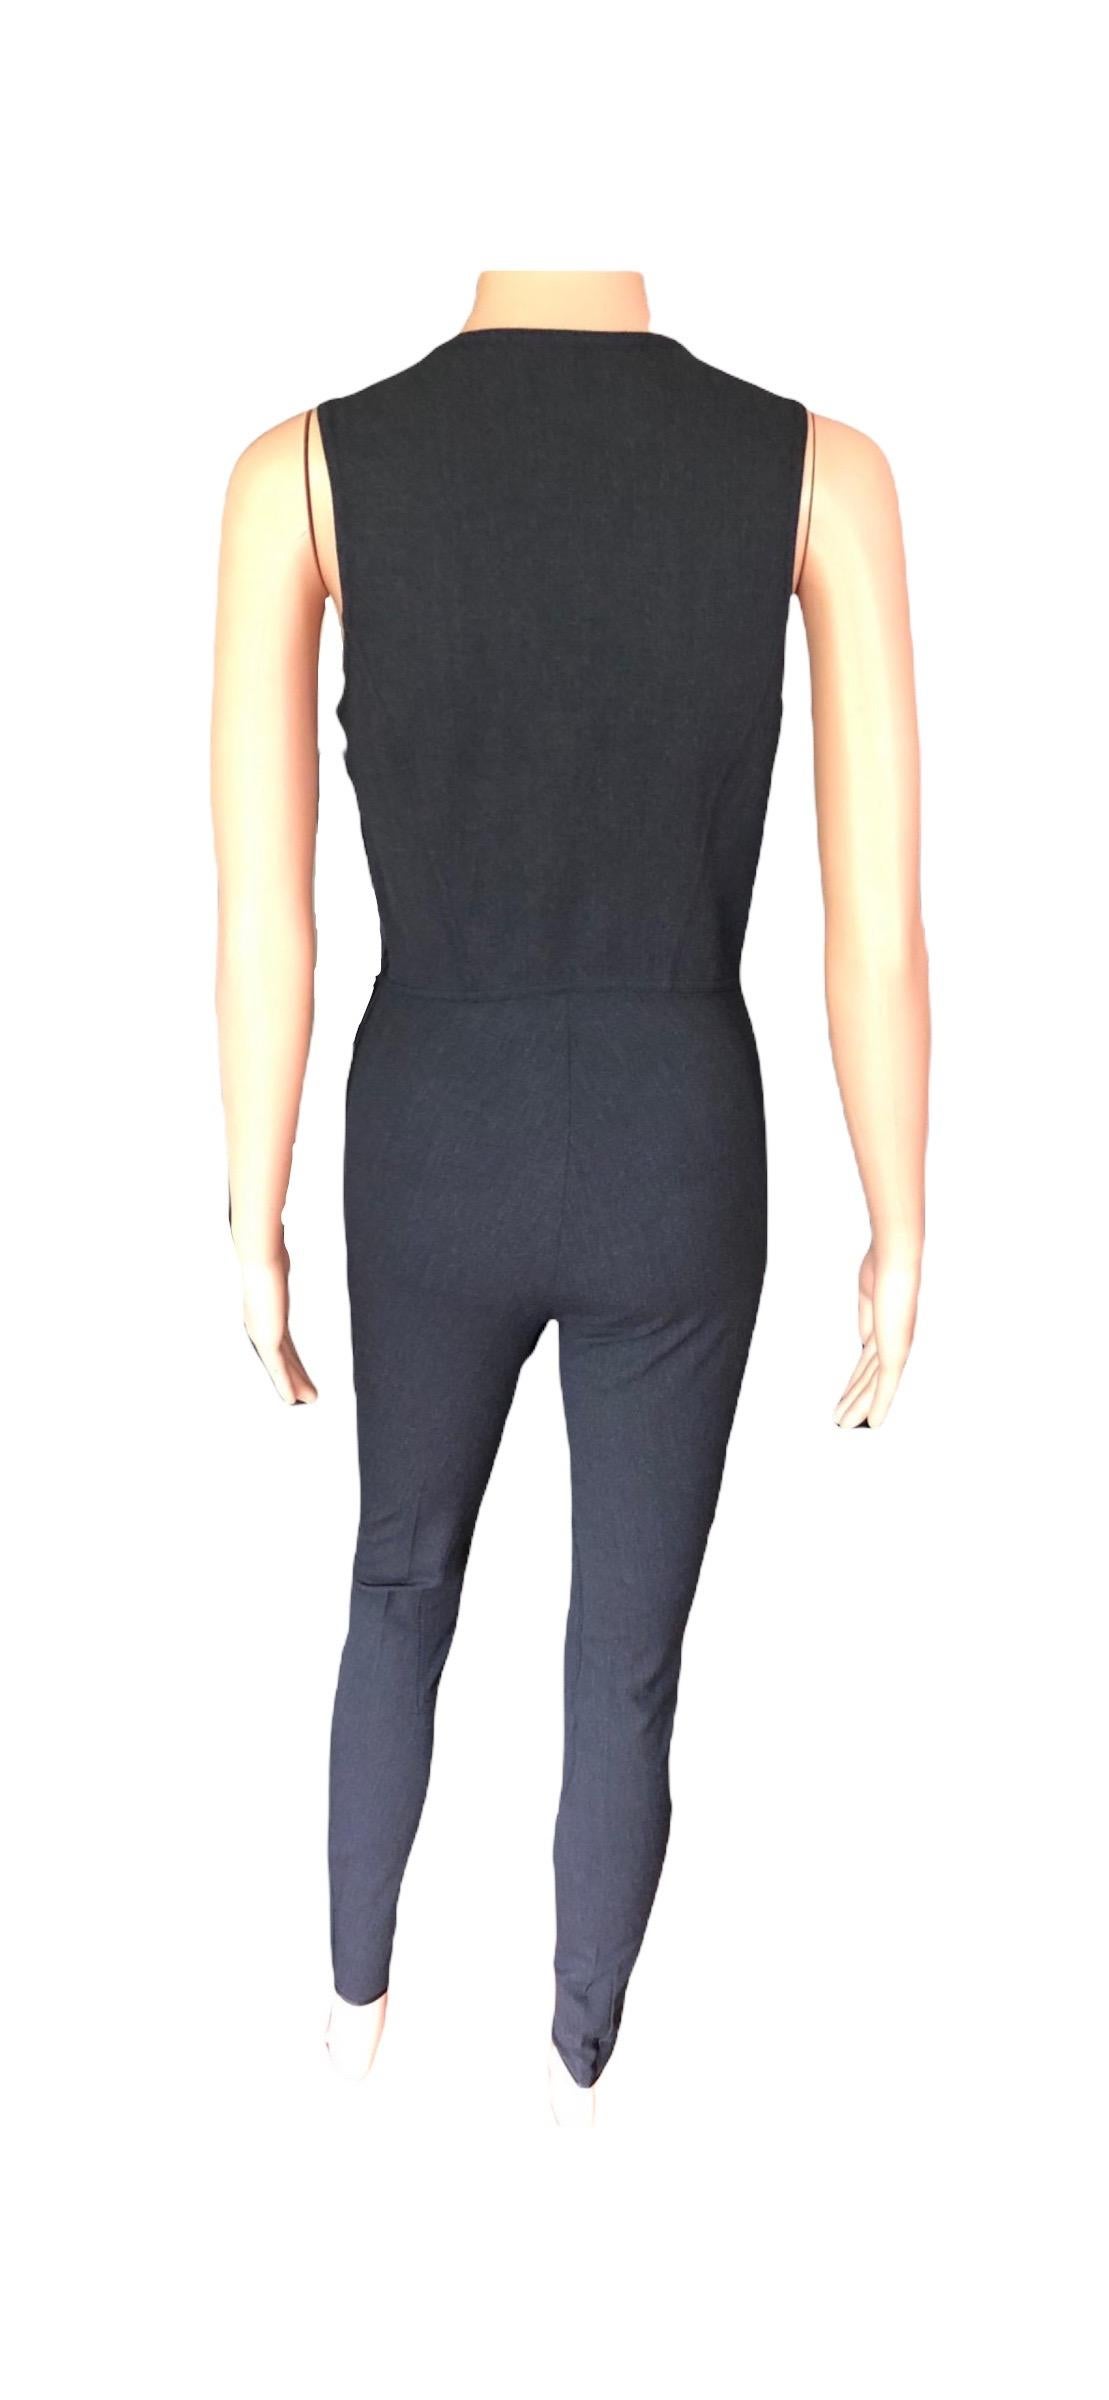 Tom Ford for Gucci S/S 1993 Runway Vintage Zipper Jumpsuit For Sale 8